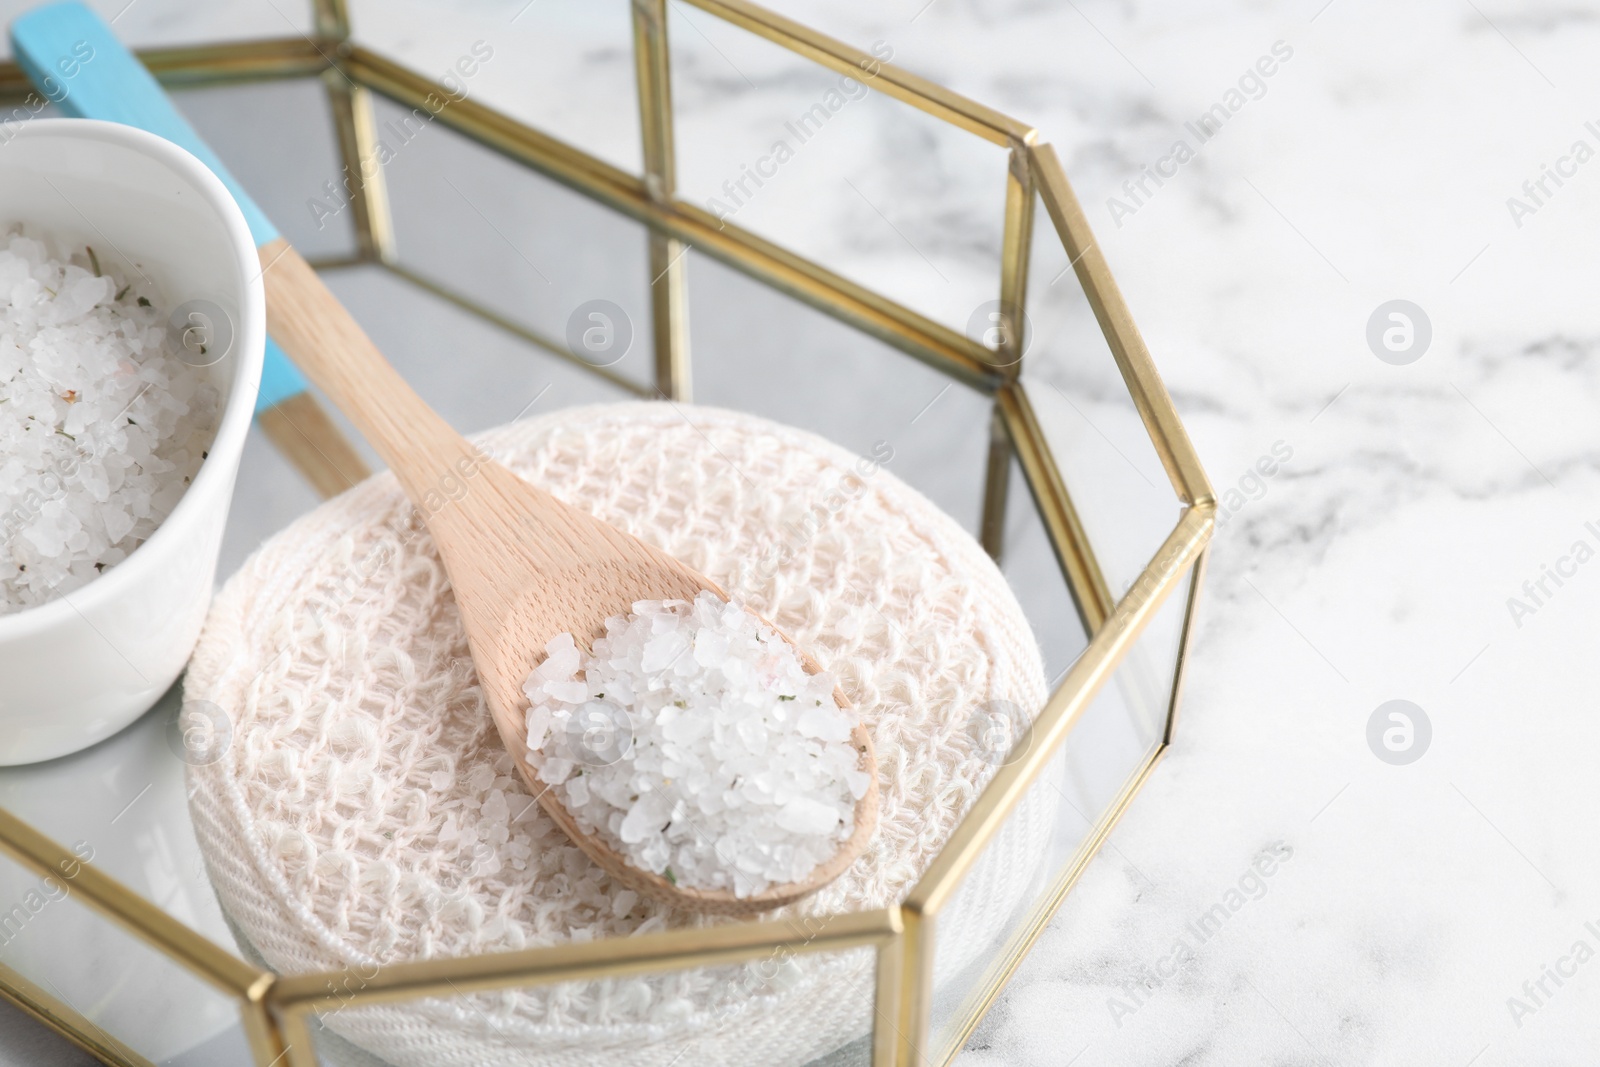 Photo of Wooden spoon with sea salt for spa scrubbing procedure on white marble table